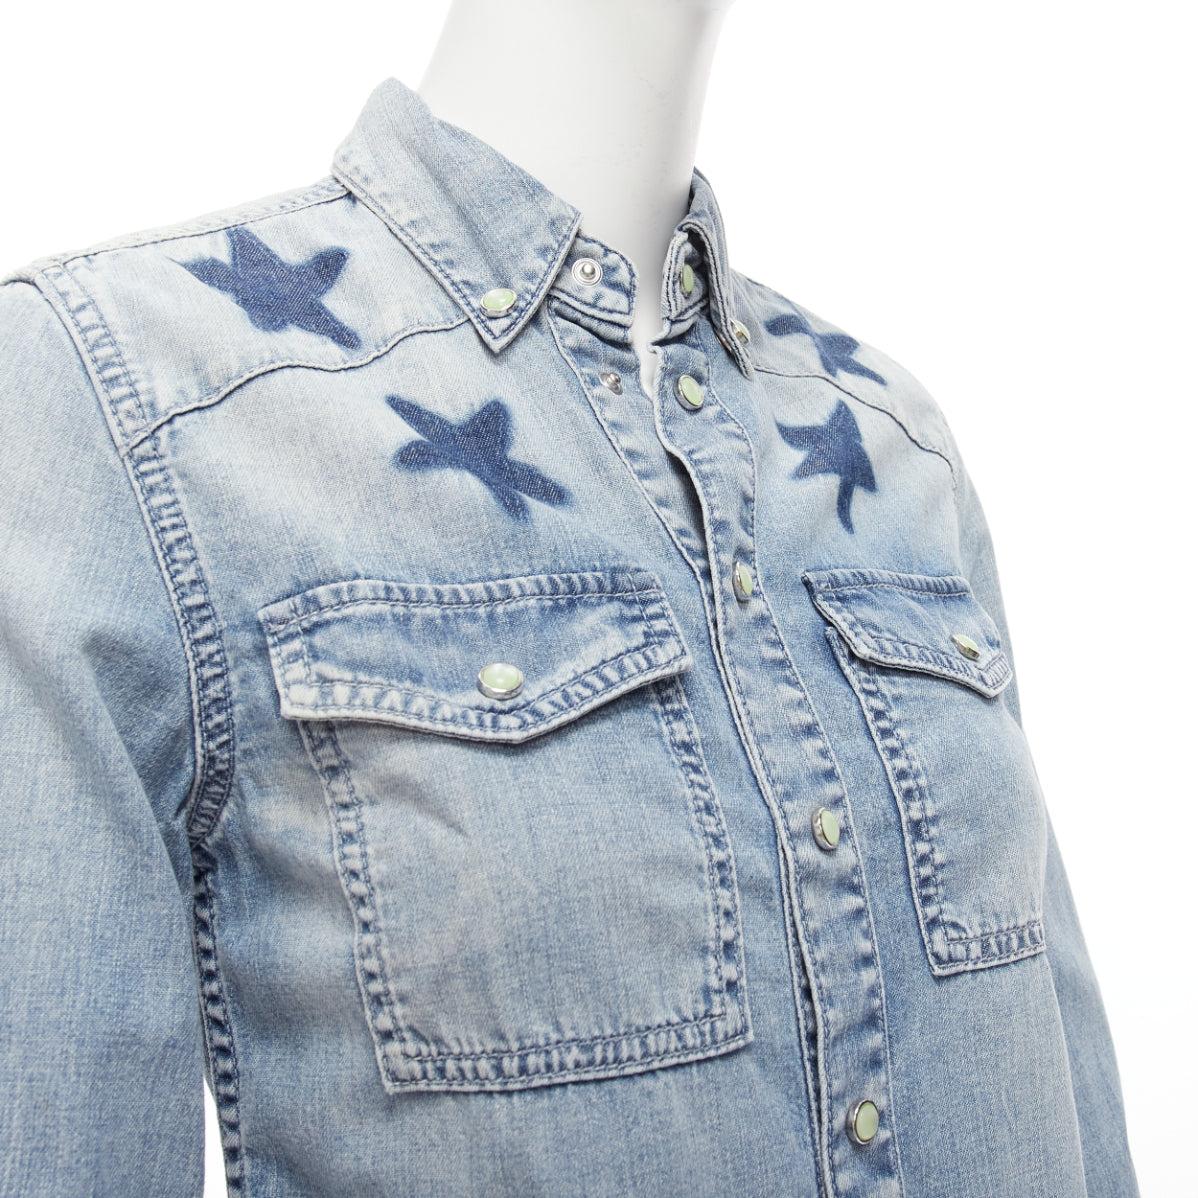 GIVENCHY Riccardo Tisci blue distressed denim star collar dress shirt FR36 S
Reference: YIKK/A00055
Brand: Givenchy
Designer: Riccardo Tisci
Material: Denim
Color: Blue
Pattern: Star
Closure: Snap Buttons
Extra Details: Resin snap buttons. Stars